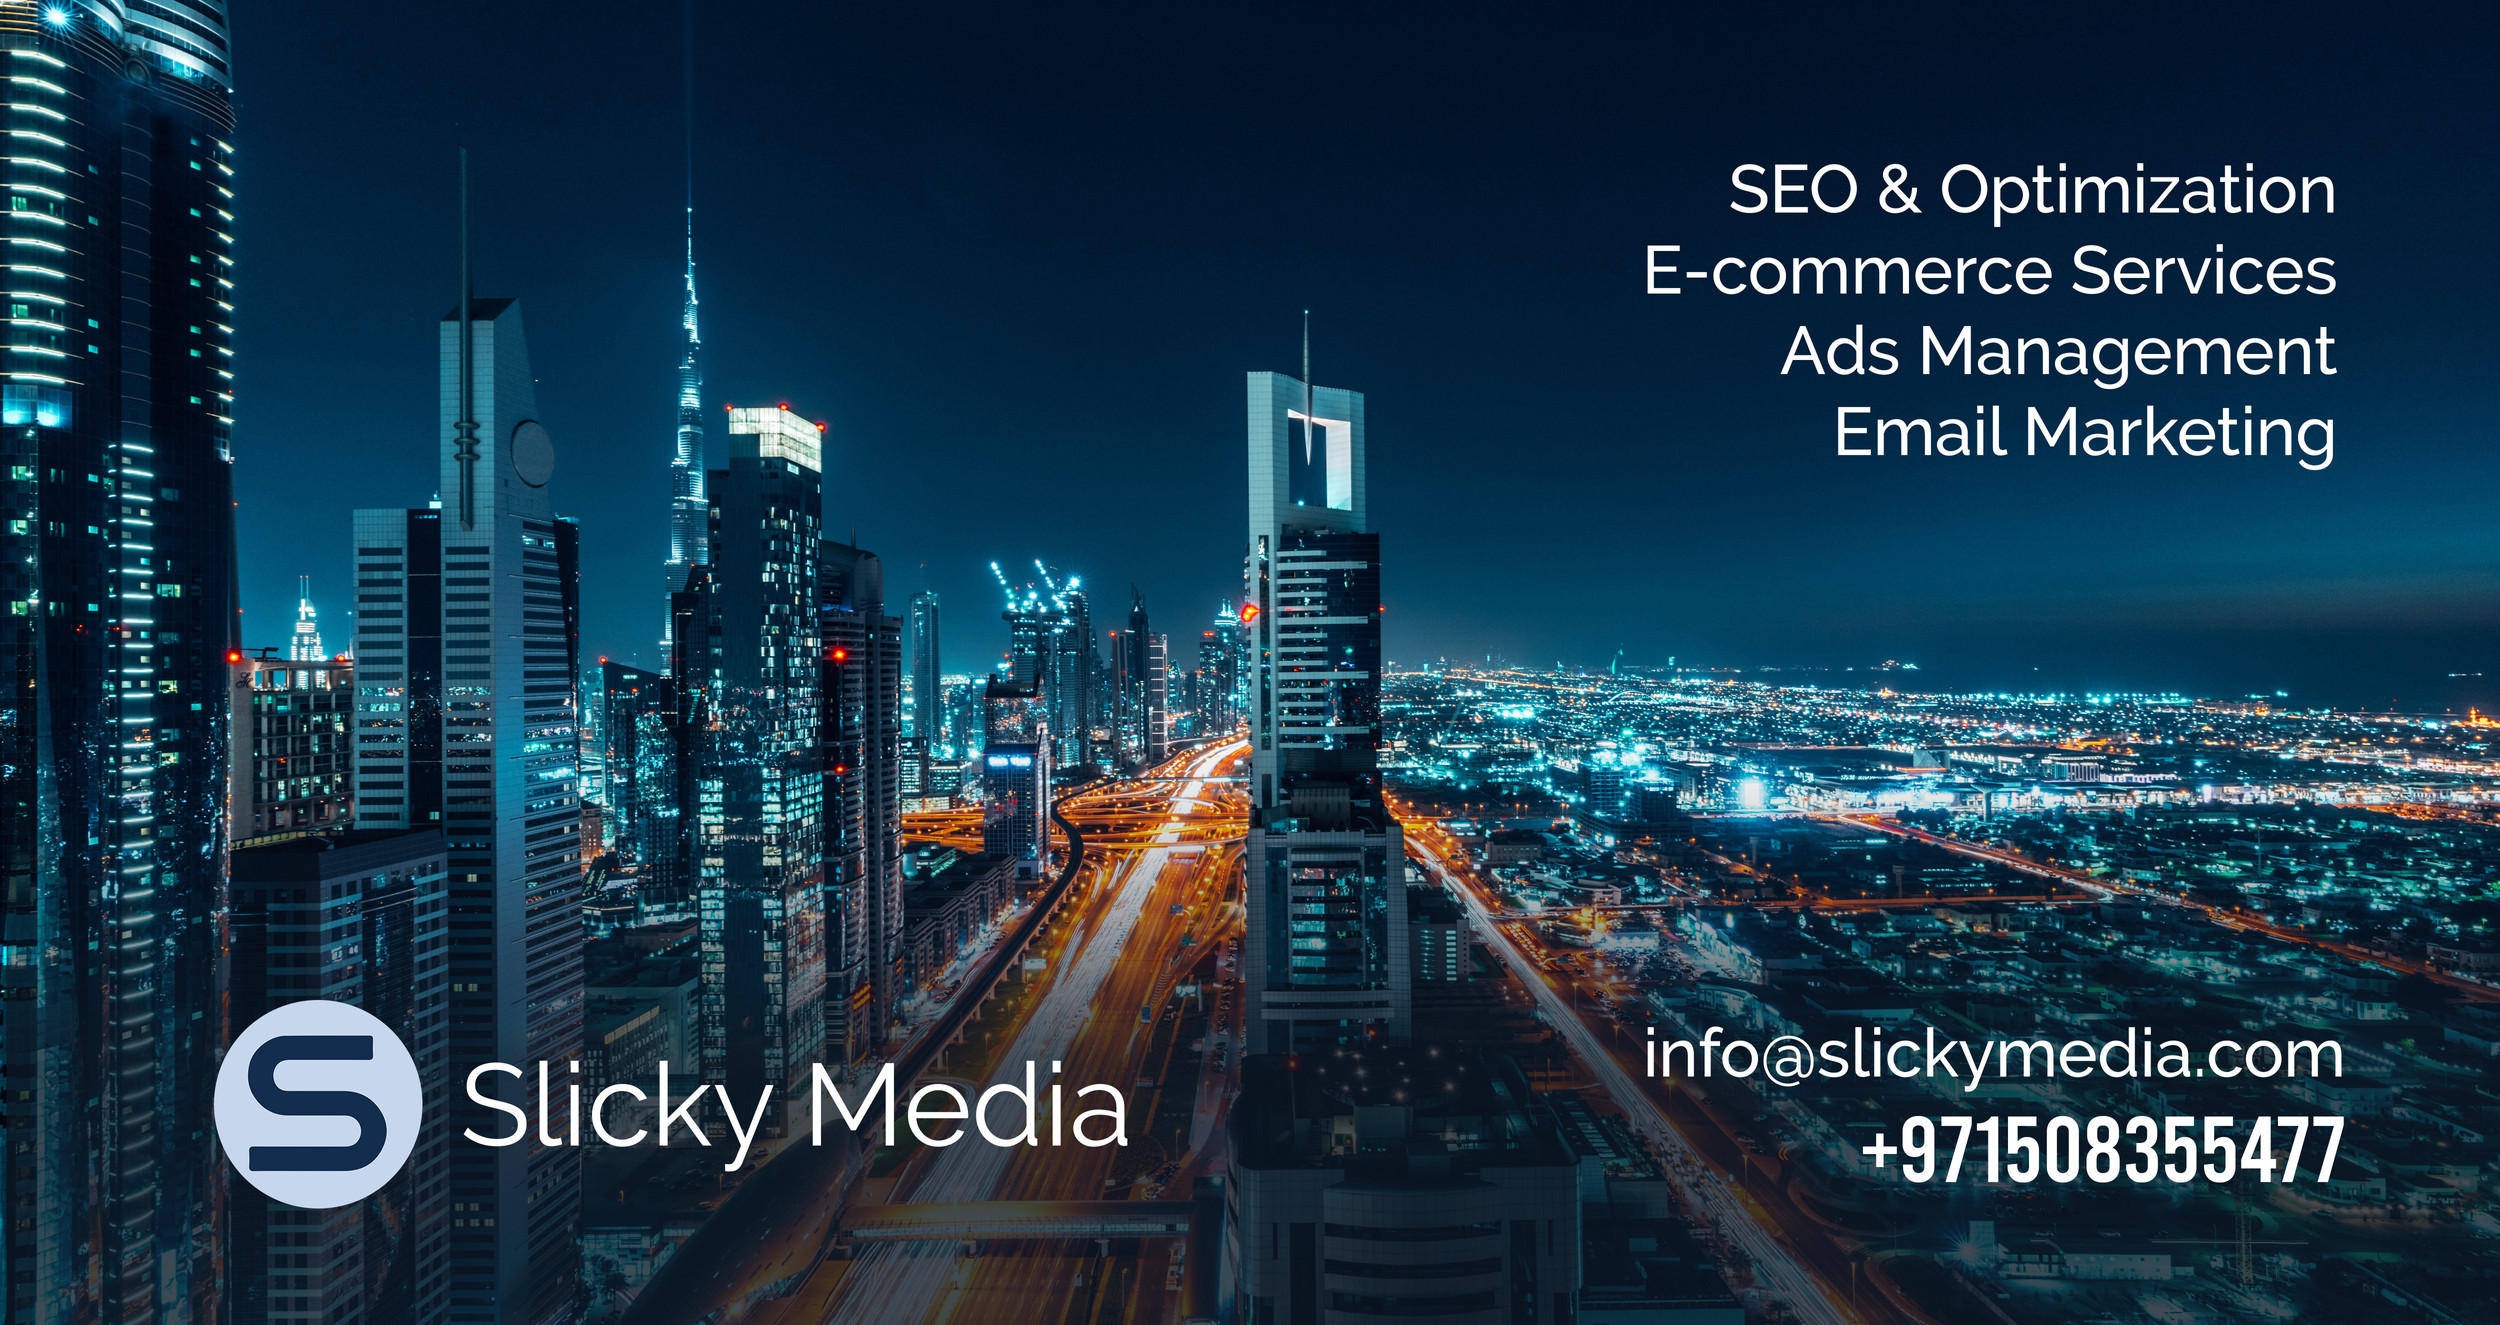 Grow Business with Digital Advertising, Social Media Marketing, PPC Management and SEO Services | Slicky Media Dubai